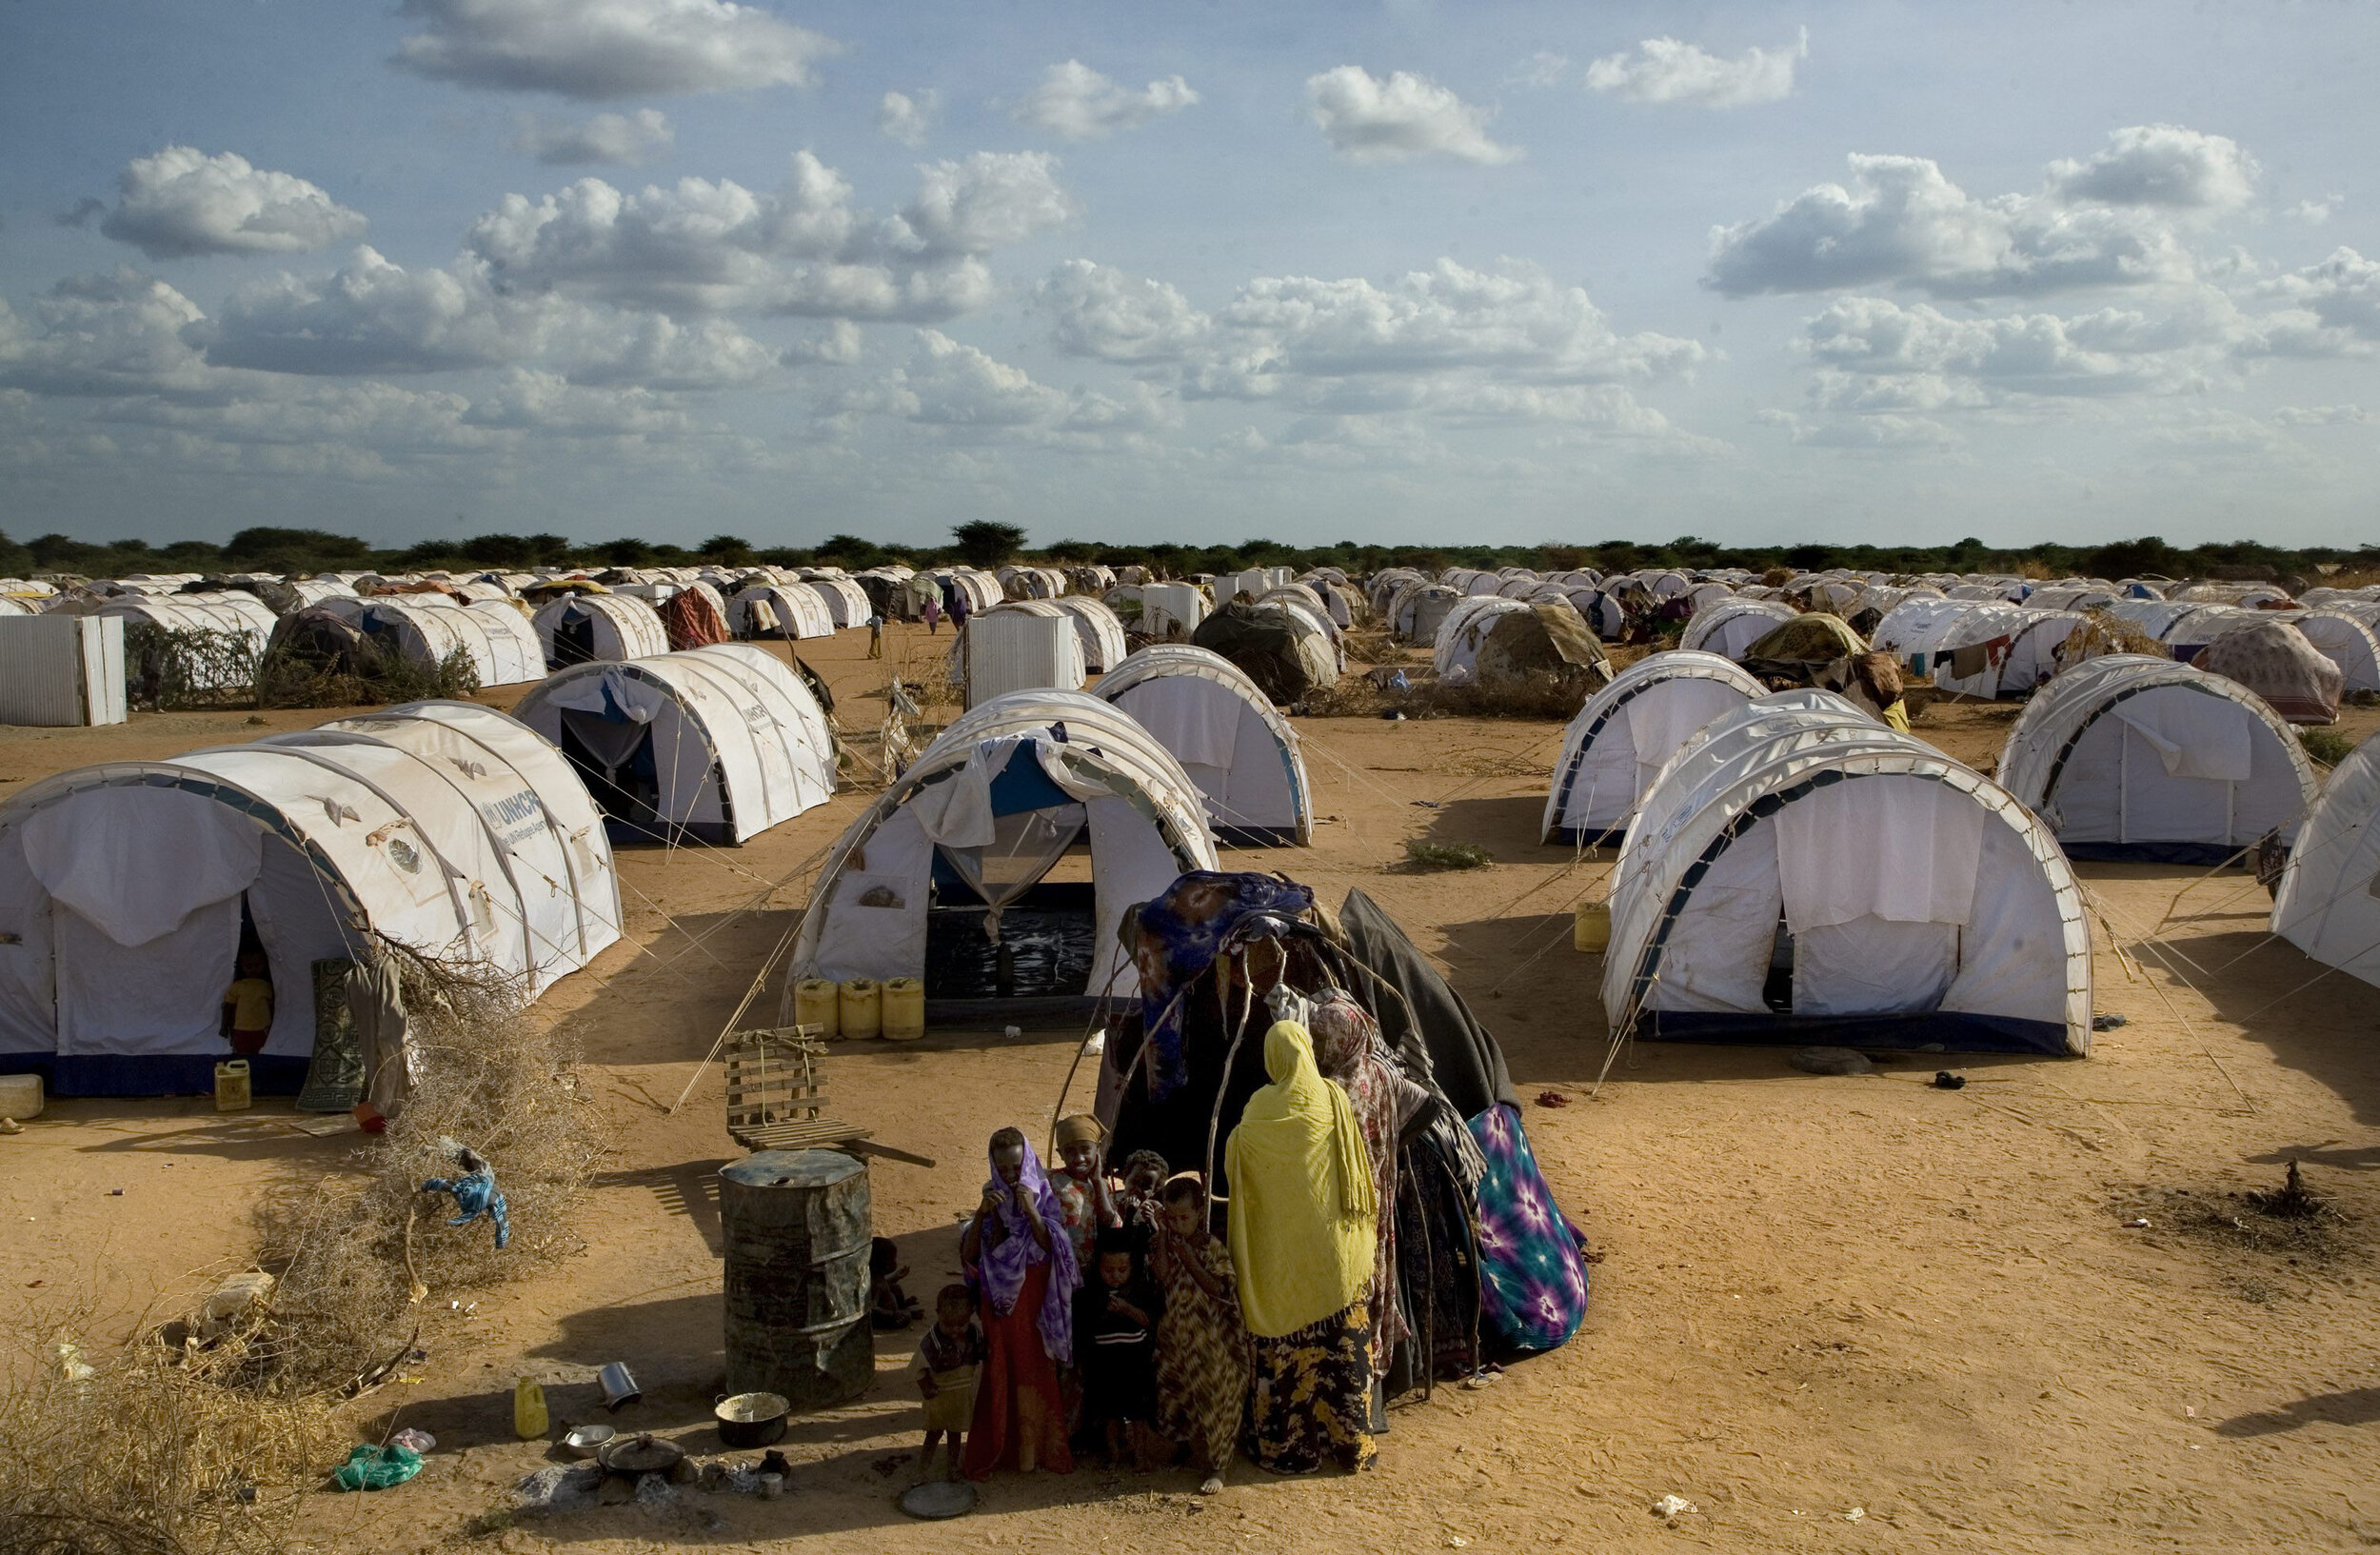 Somali refugees at the Dadaab camp in Kenya, the largest in the world when this photo was taken, December 17, 2008.